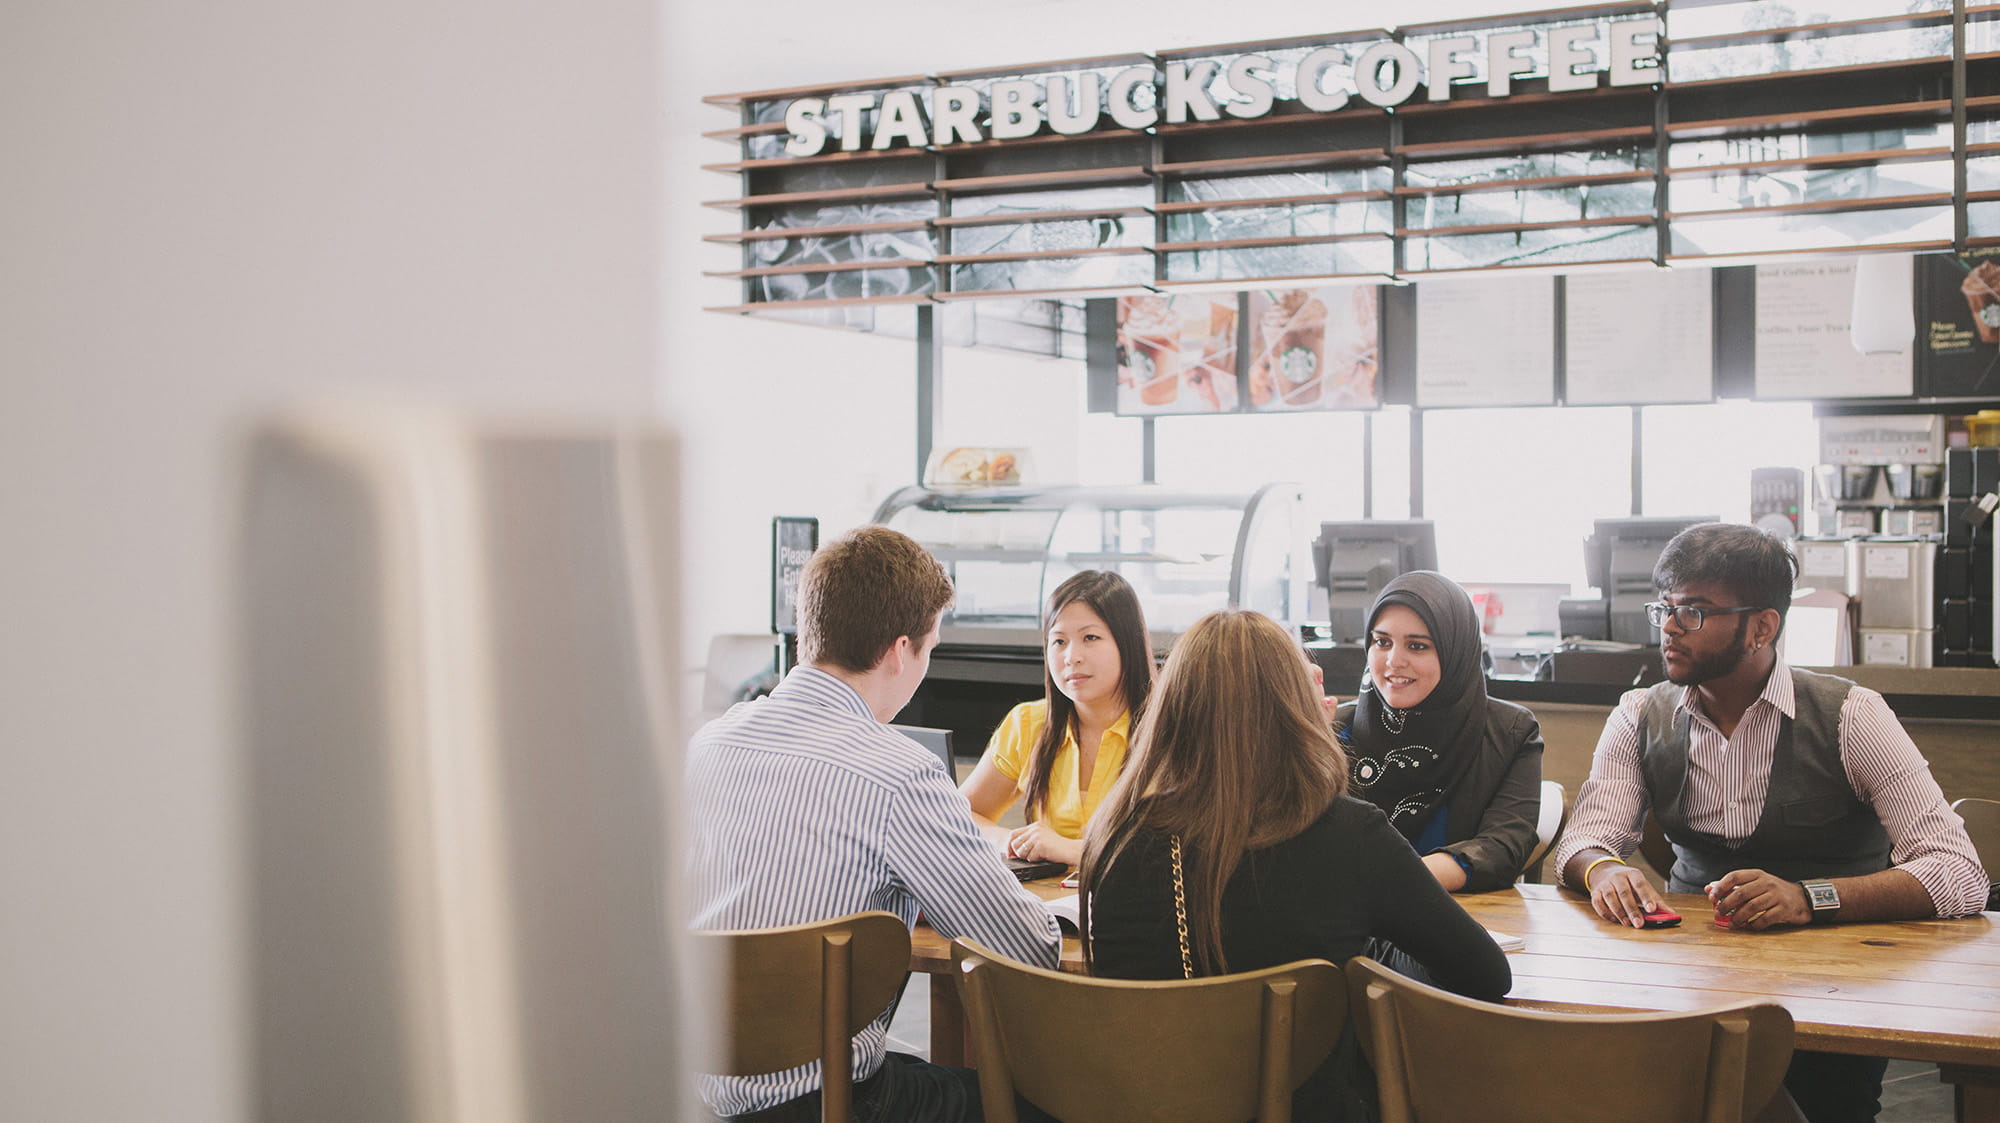 A group of students sitting at a table at Starbucks.